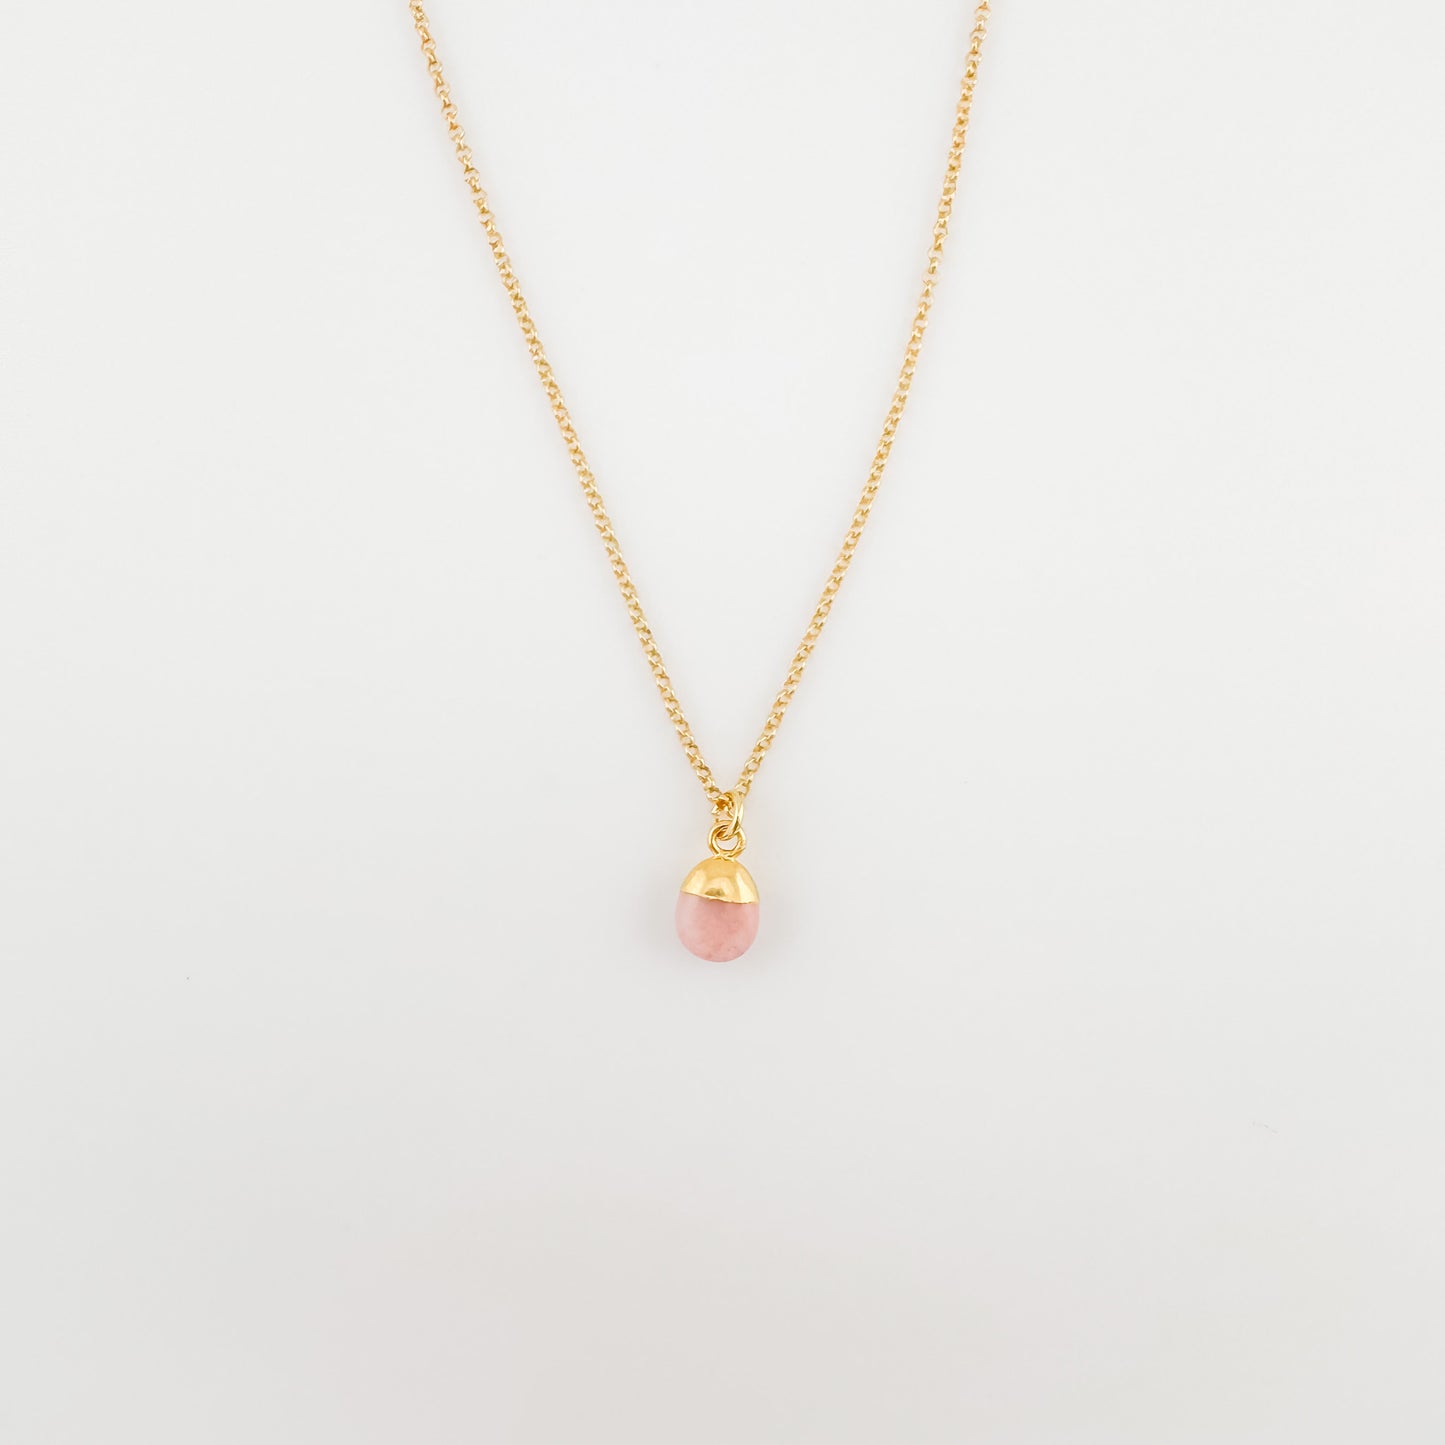 Pink opal tumbled necklace